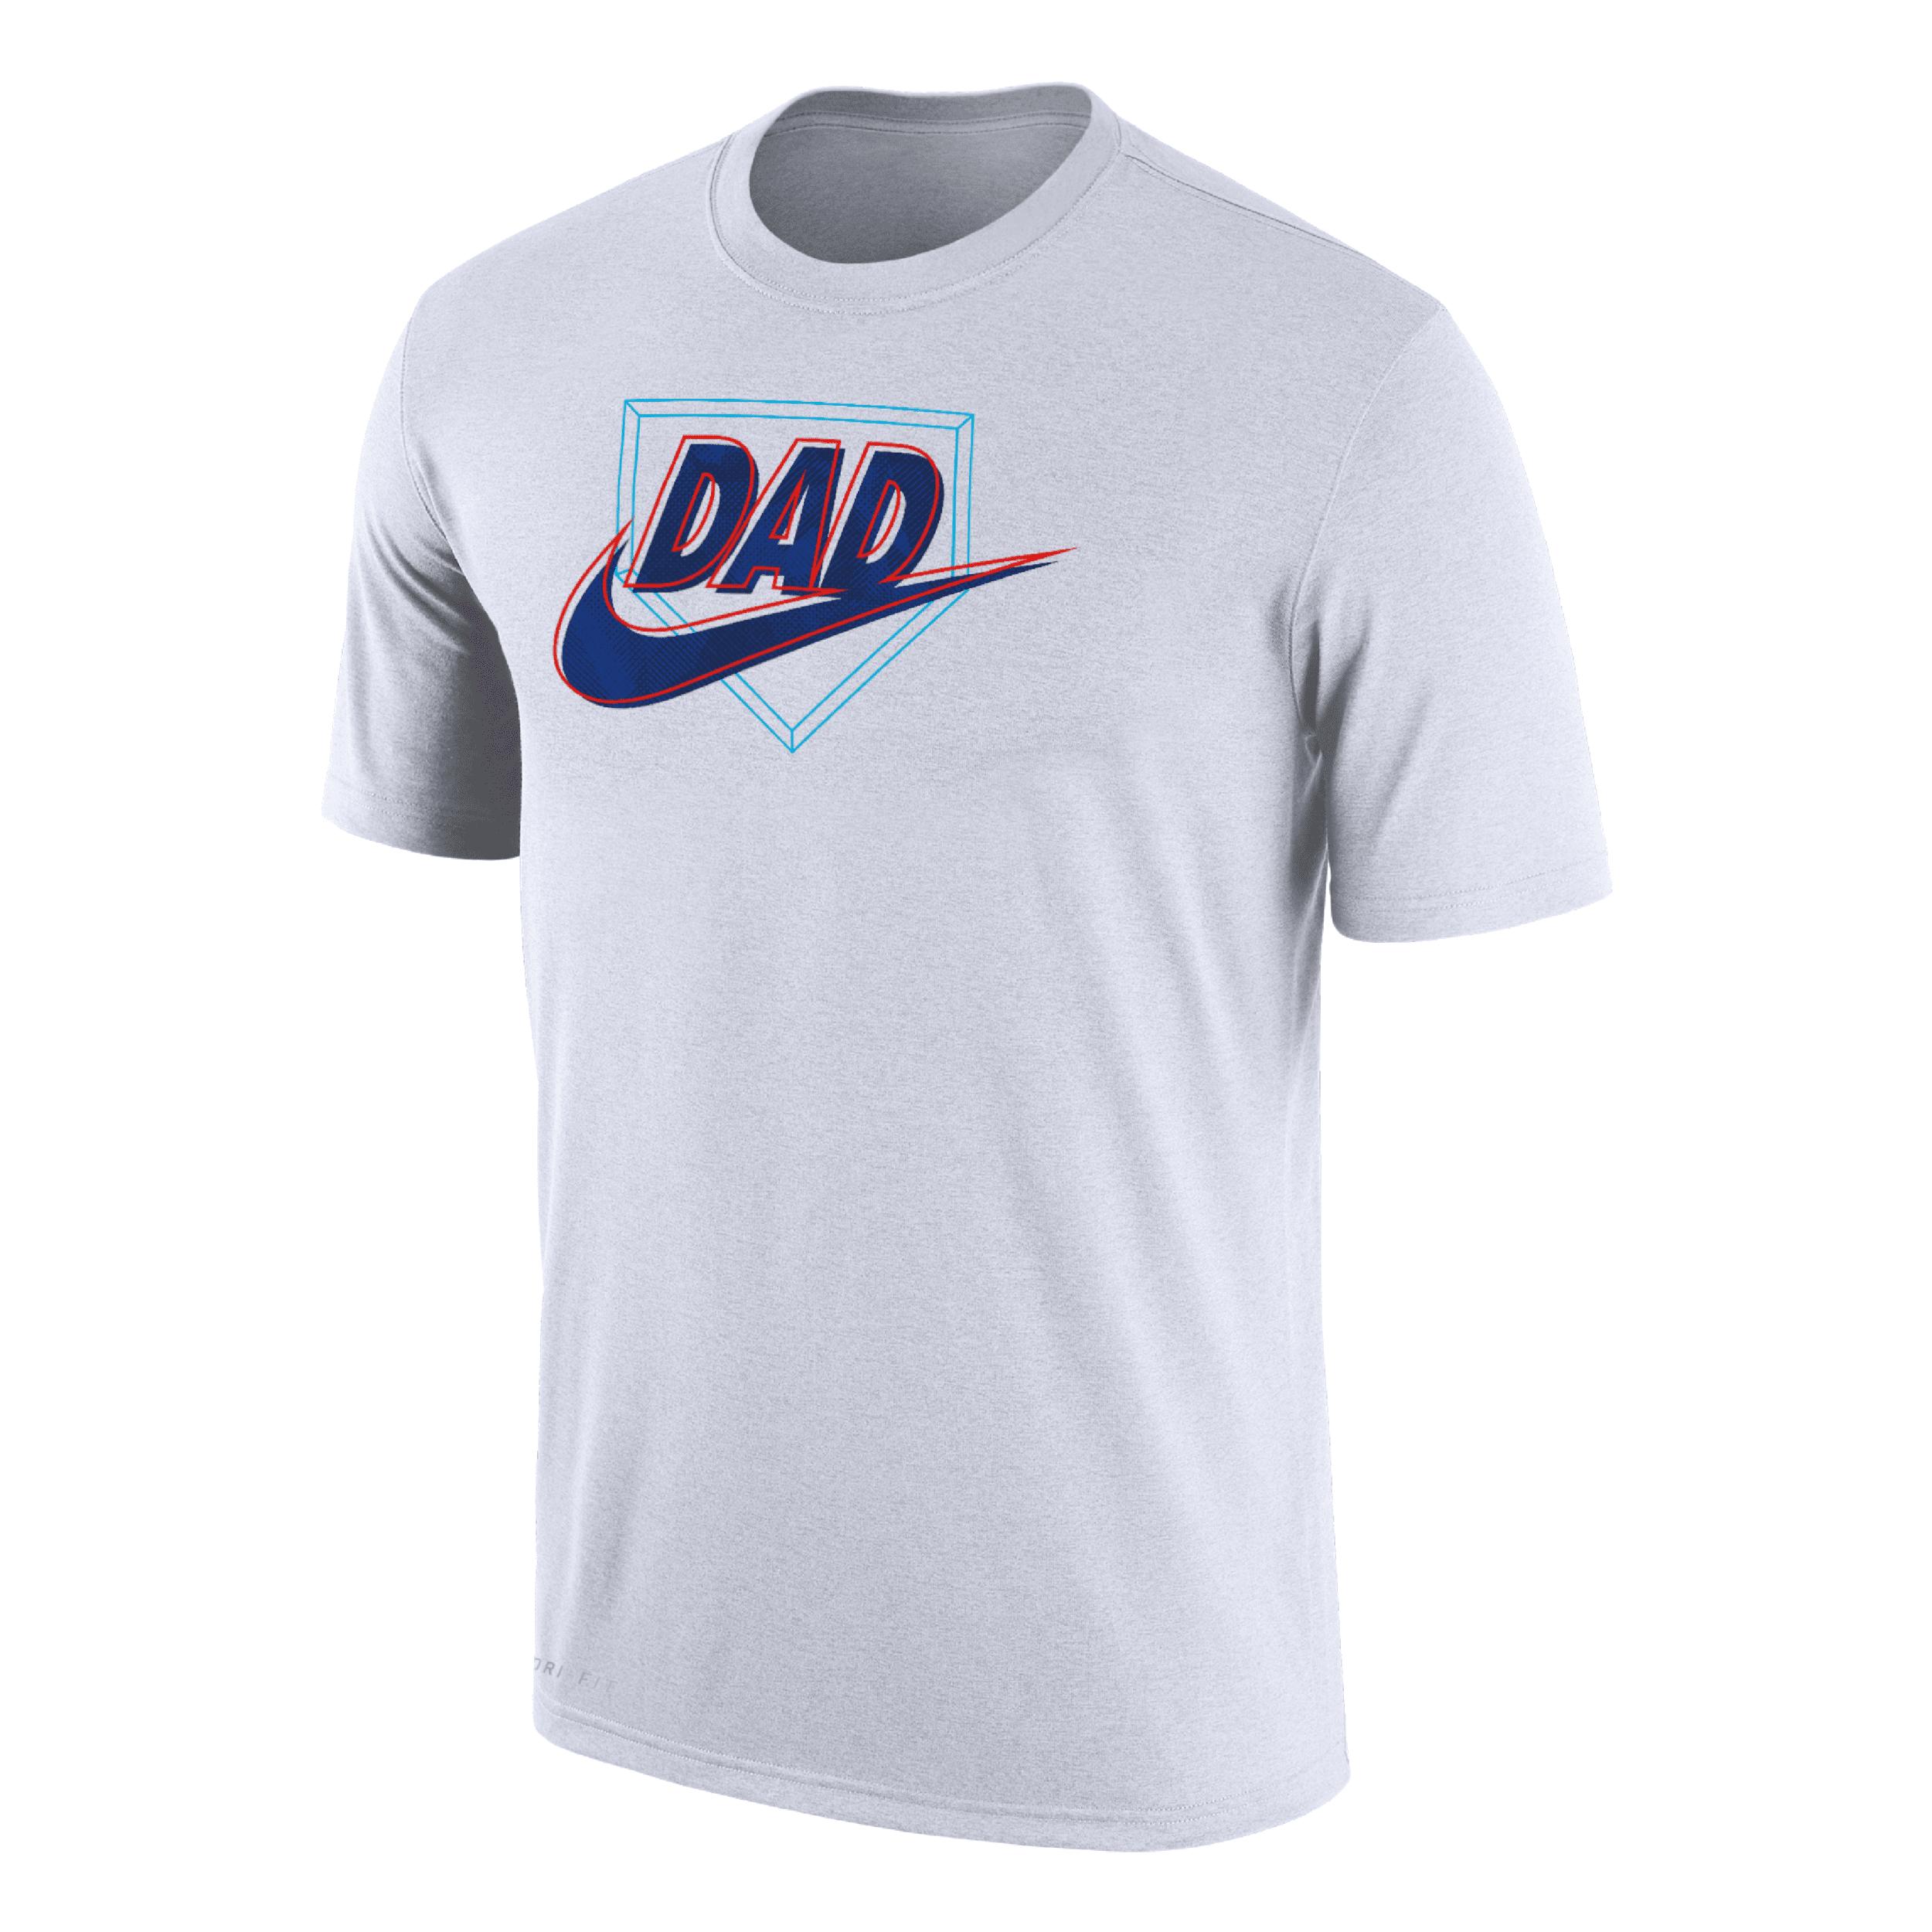 Nike father's Day Baseball T-shirt in Blue for Men